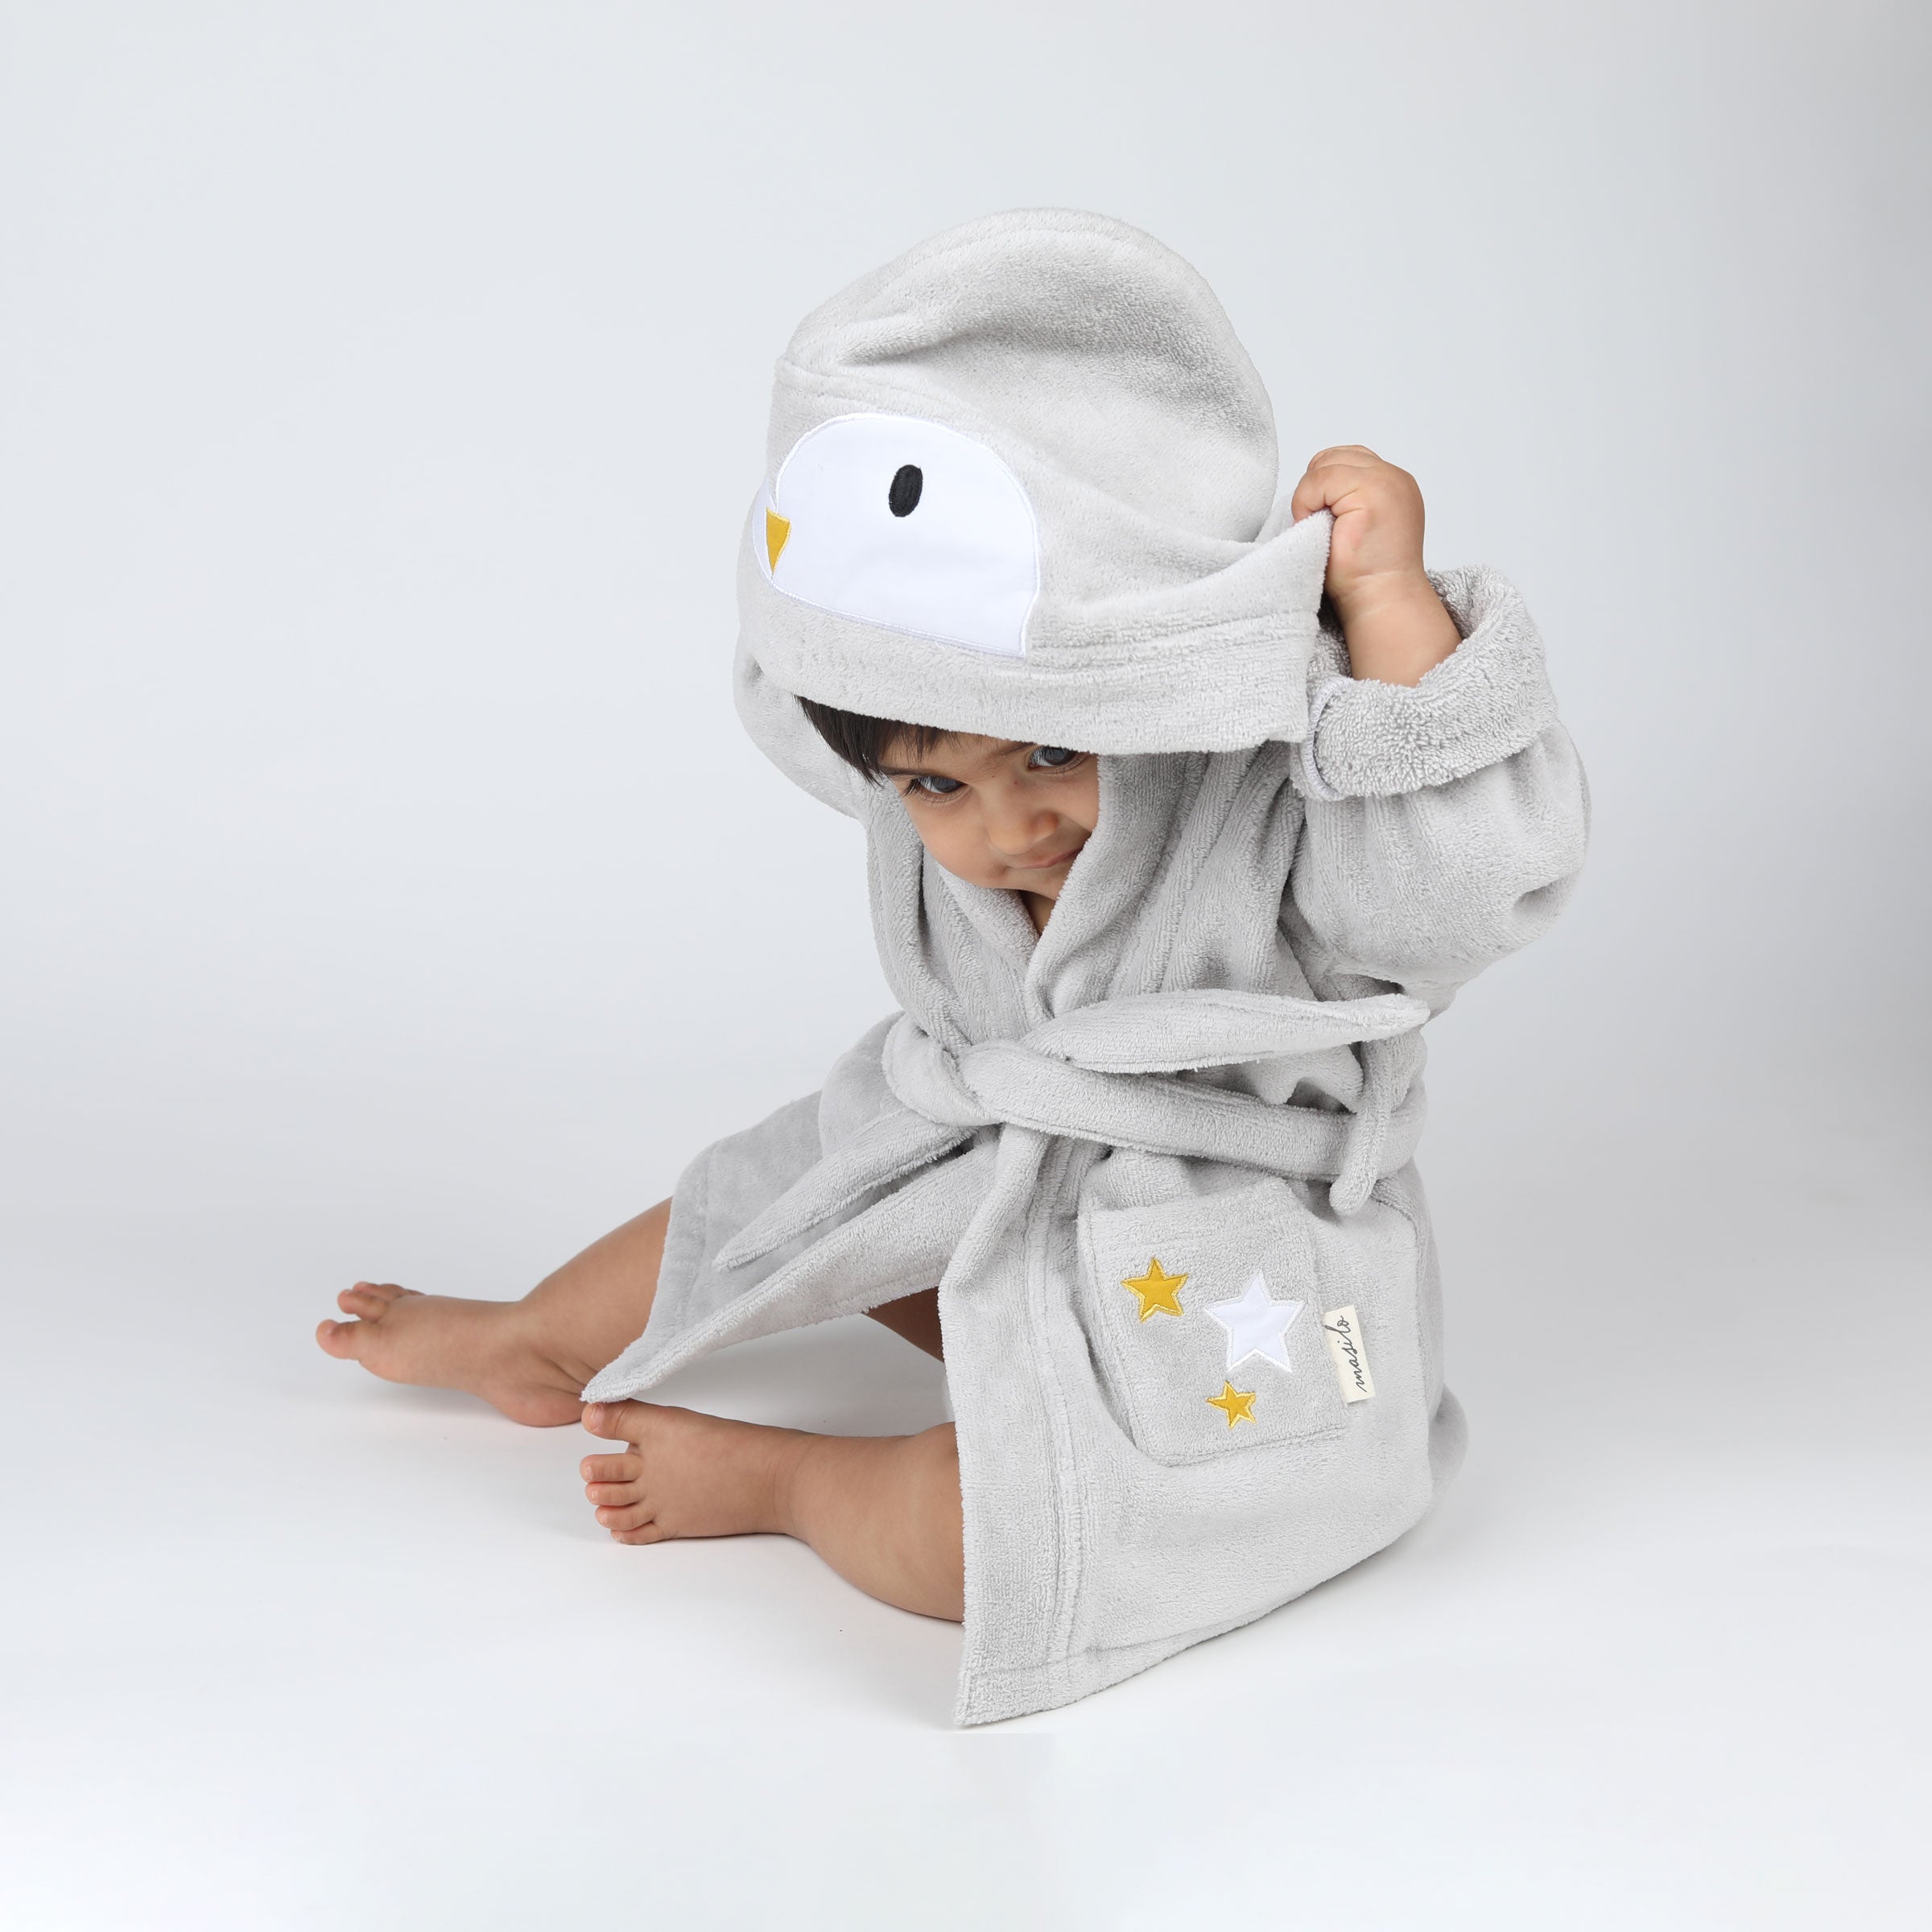 Animal Baby Bathrobes Swaddling Towel Terry Newborn Receiving Blanket Boys  Washing Robes Girl Bath Robe Outfits Hooded Costumes - Robes - AliExpress